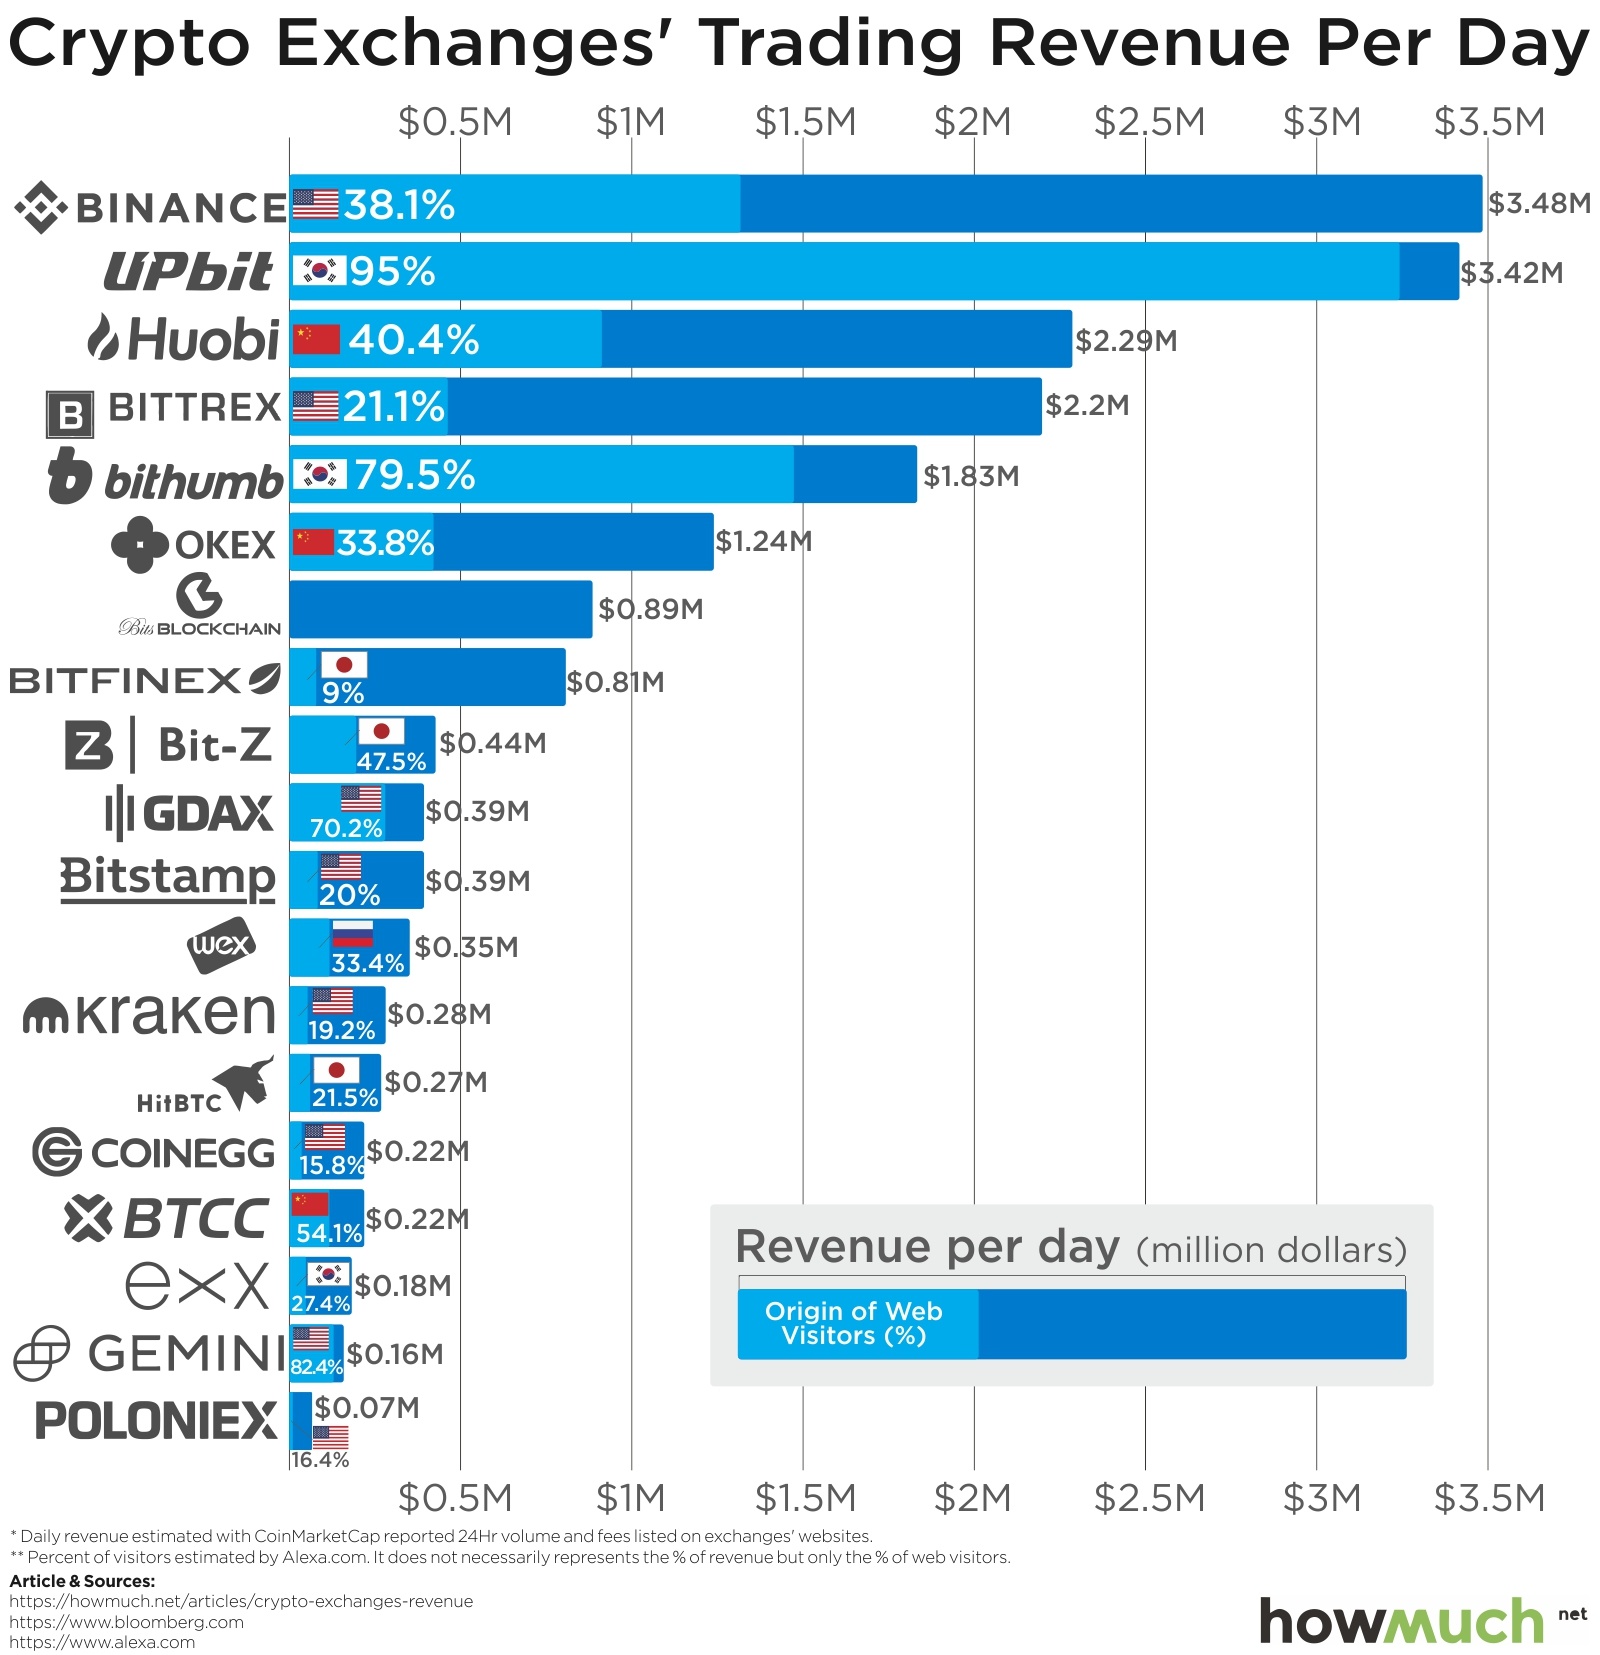 How profitable are the world’s top crypto exchanges? LeapRate